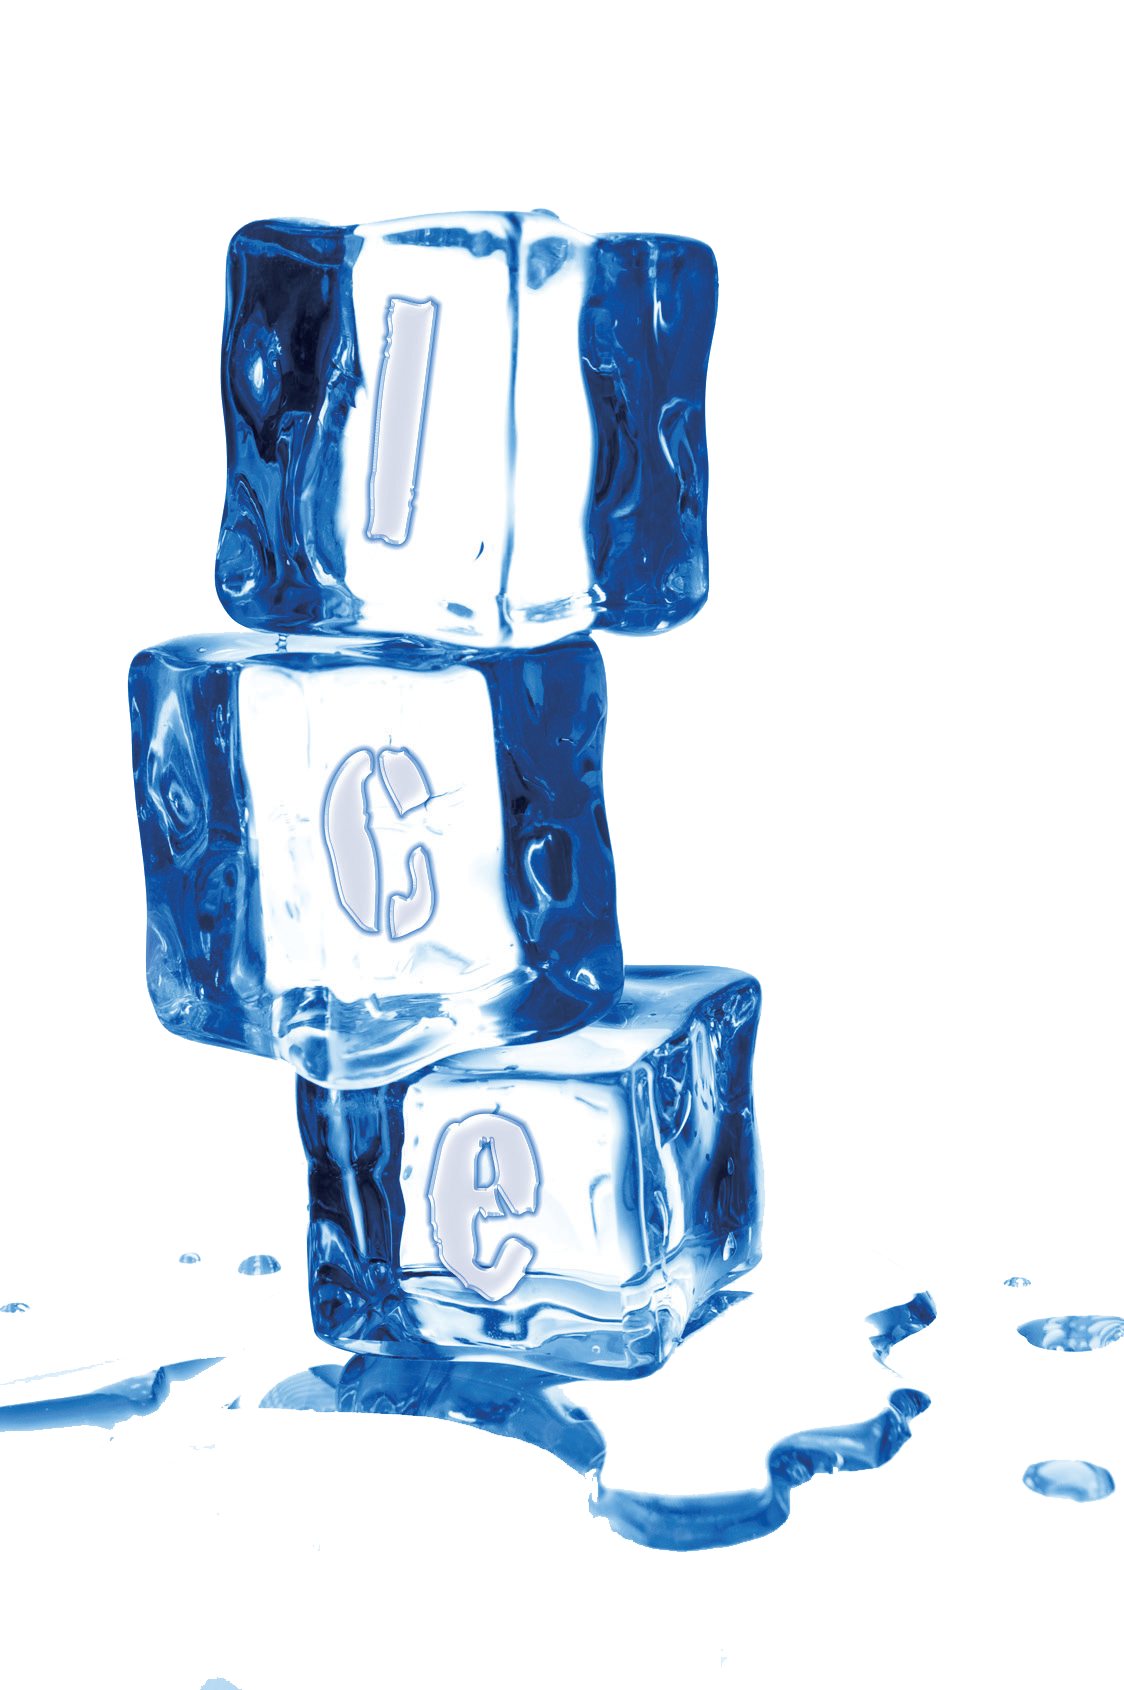 Image of three melting ice cubes stacked up. The letter I is on the top cube, the letter C is on the middle cube, and the letter E is on the bottom cube. There is a puddle of water at the bottom.